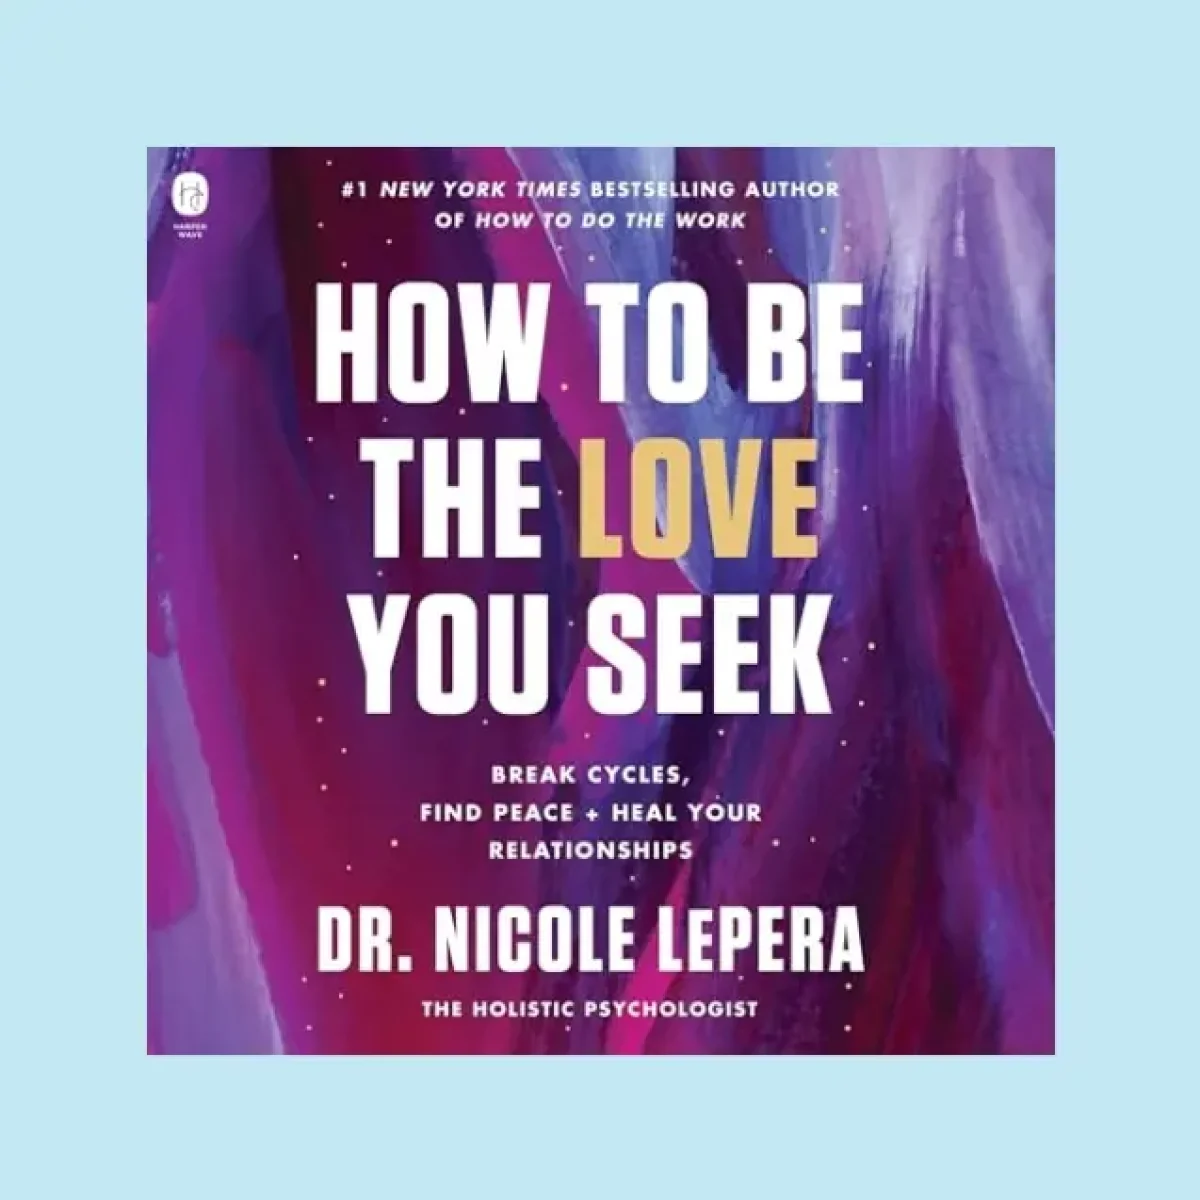 Cover of How to be the Love You Seek by Dr. Nicole Lepera